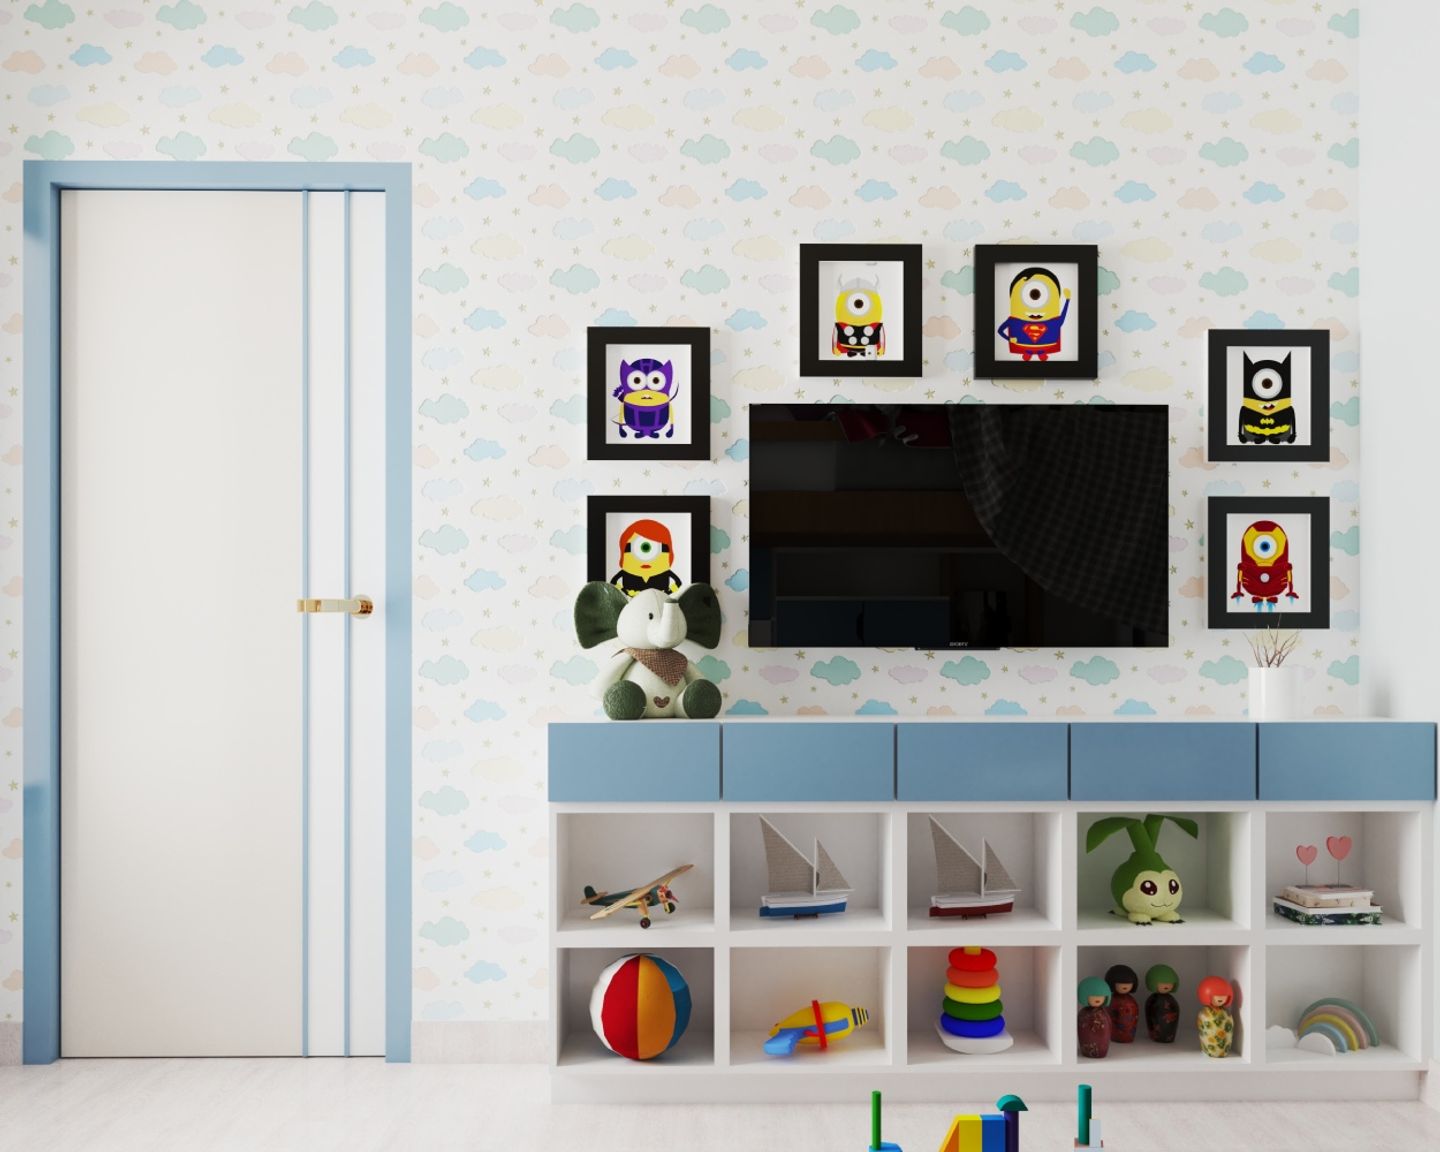 Wallpaper Design With Wall Art For Kids' Rooms - Livspace